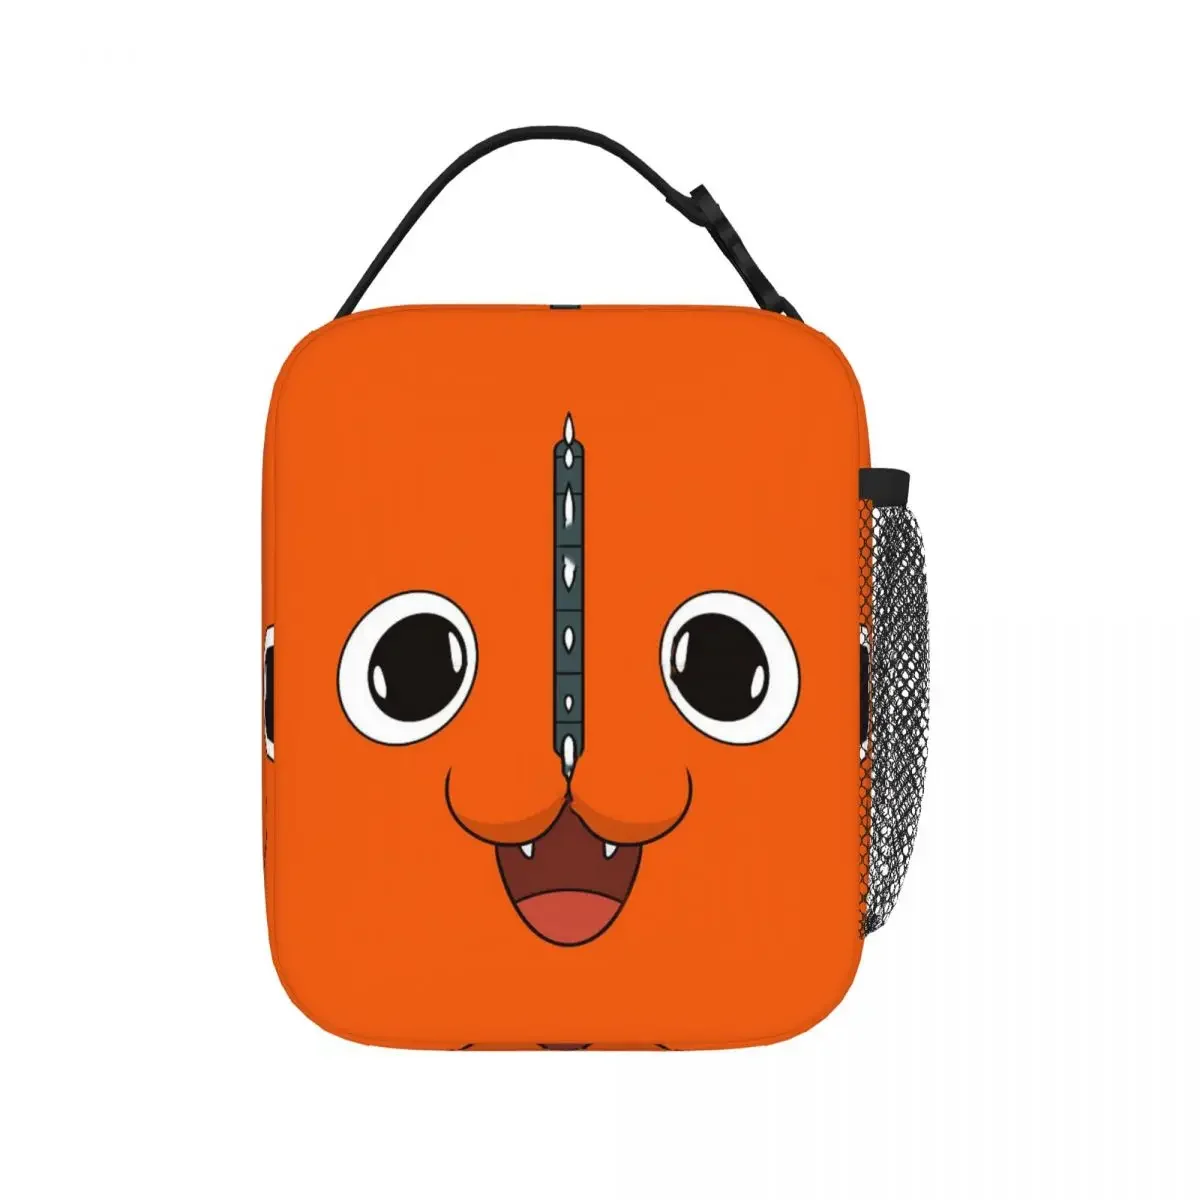 

Woof Chainsaw Lunch Bags Insulated Lunch Tote Portable Bento Box Resuable Picnic Bags for Woman Work Kids School